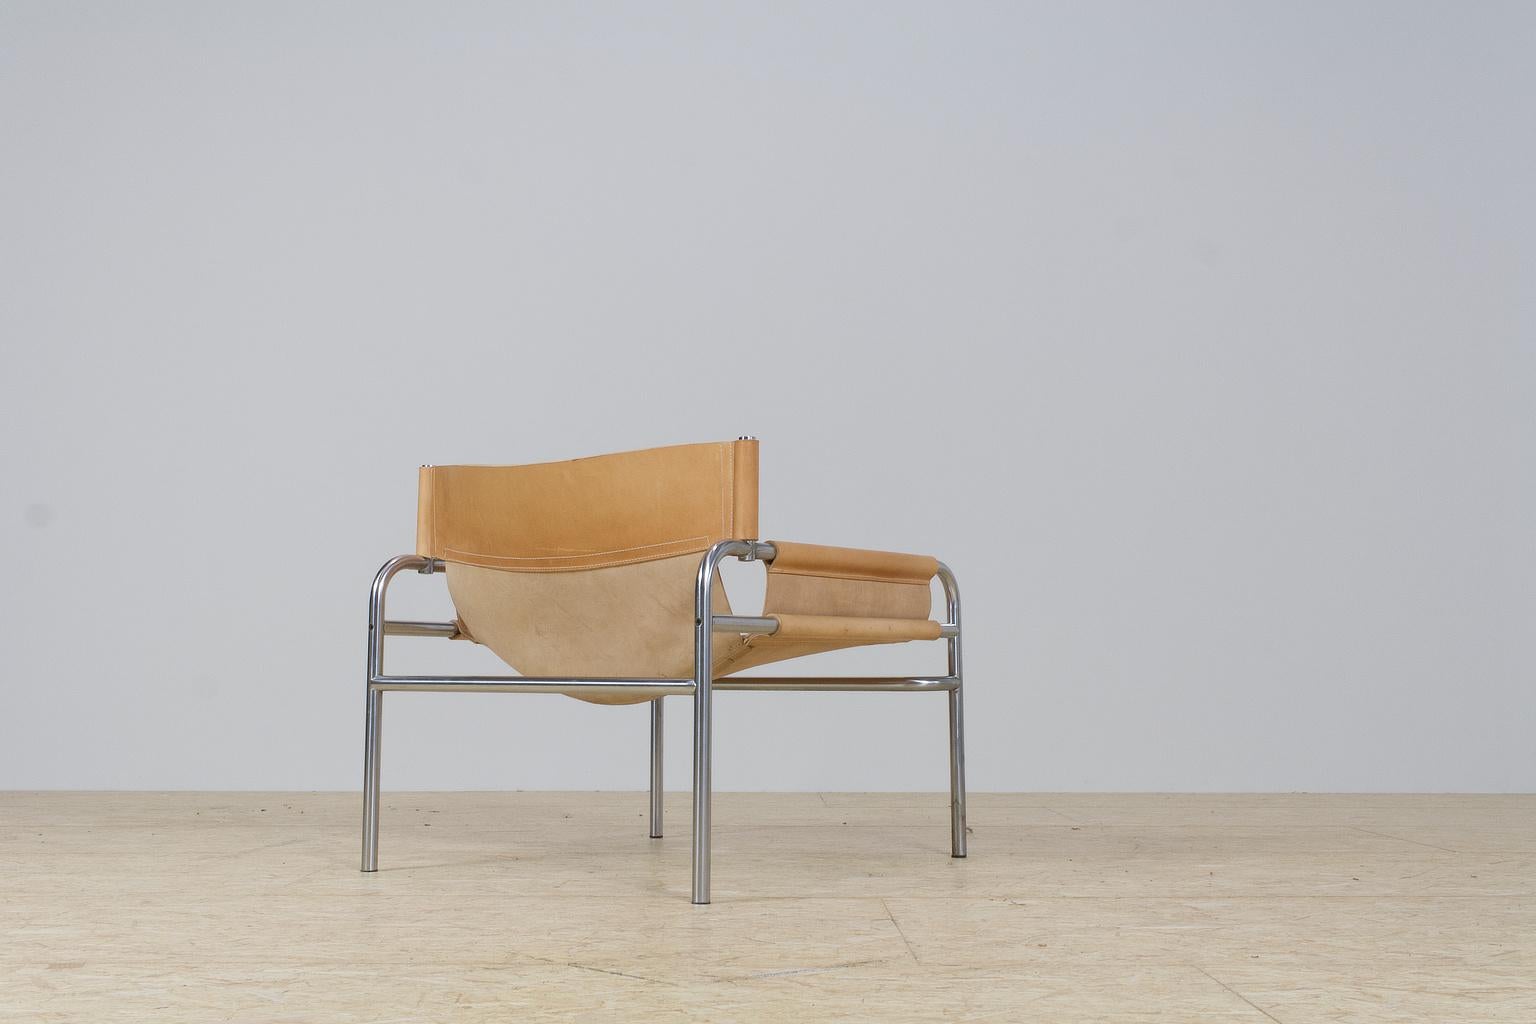 Dutch Mid-Century Modernist Lounge Chairs in Saddle Leather by Walter Antonis, 1974 For Sale